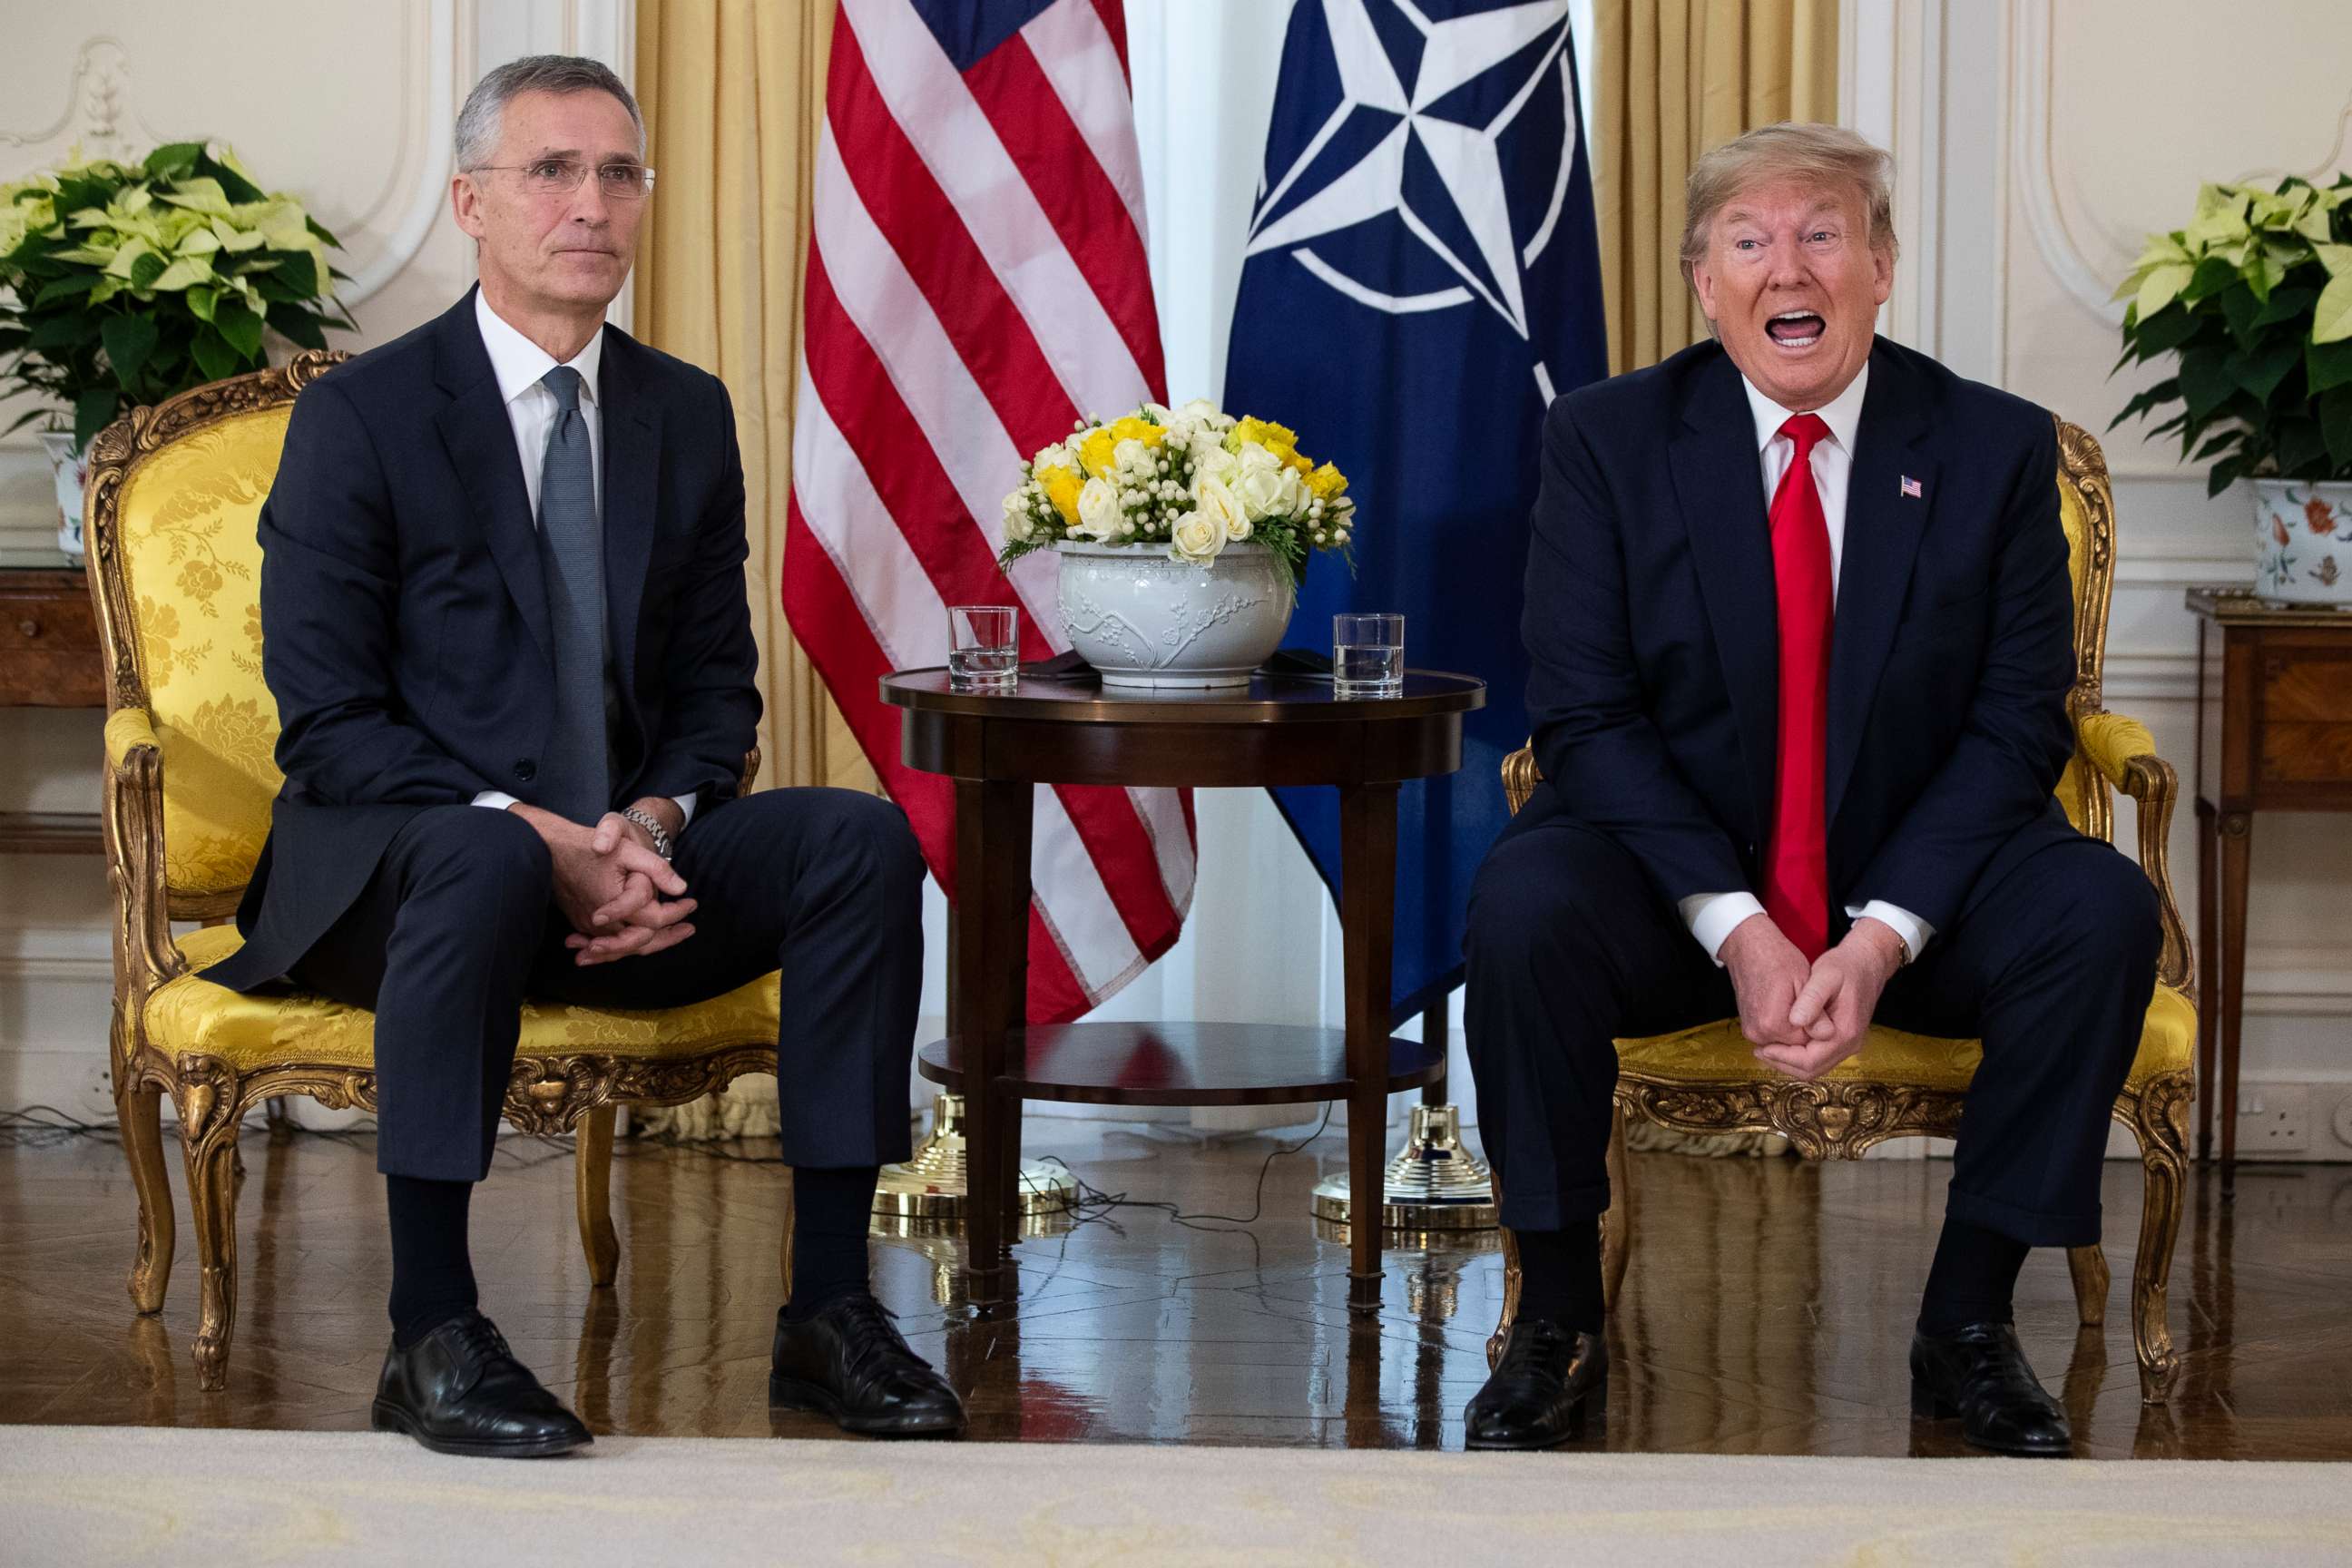 PHOTO: U.S. President Donald Trump speaks during a meeting with NATO Secretary General, Jens Stoltenberg at Winfield House in London, Tuesday, Dec. 3, 2019. (AP Photo/Evan Vucci)